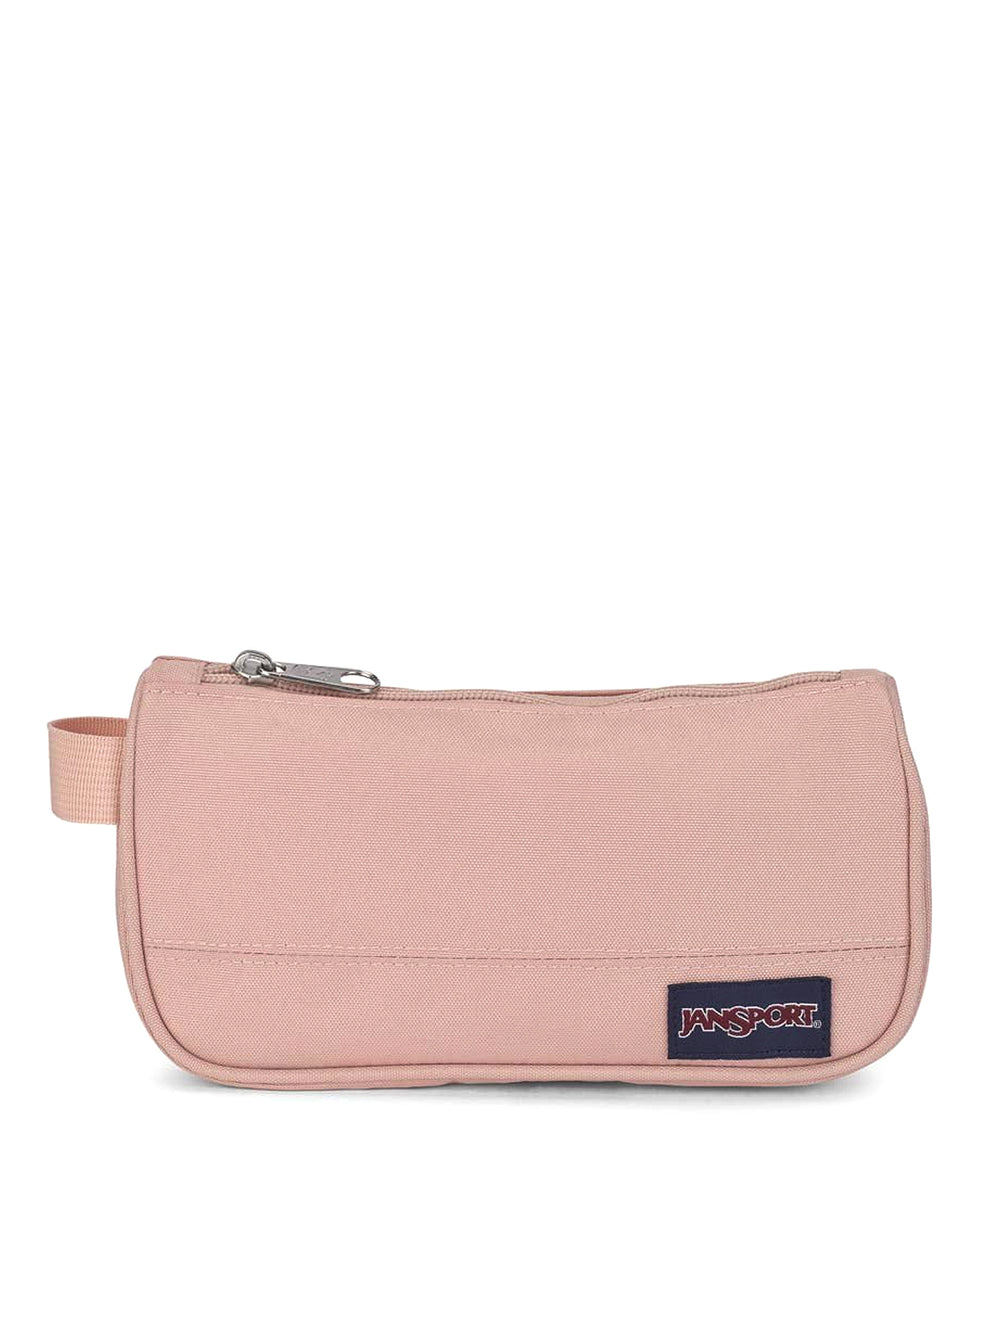 JANSPORT MED ACCESSORY POUCH